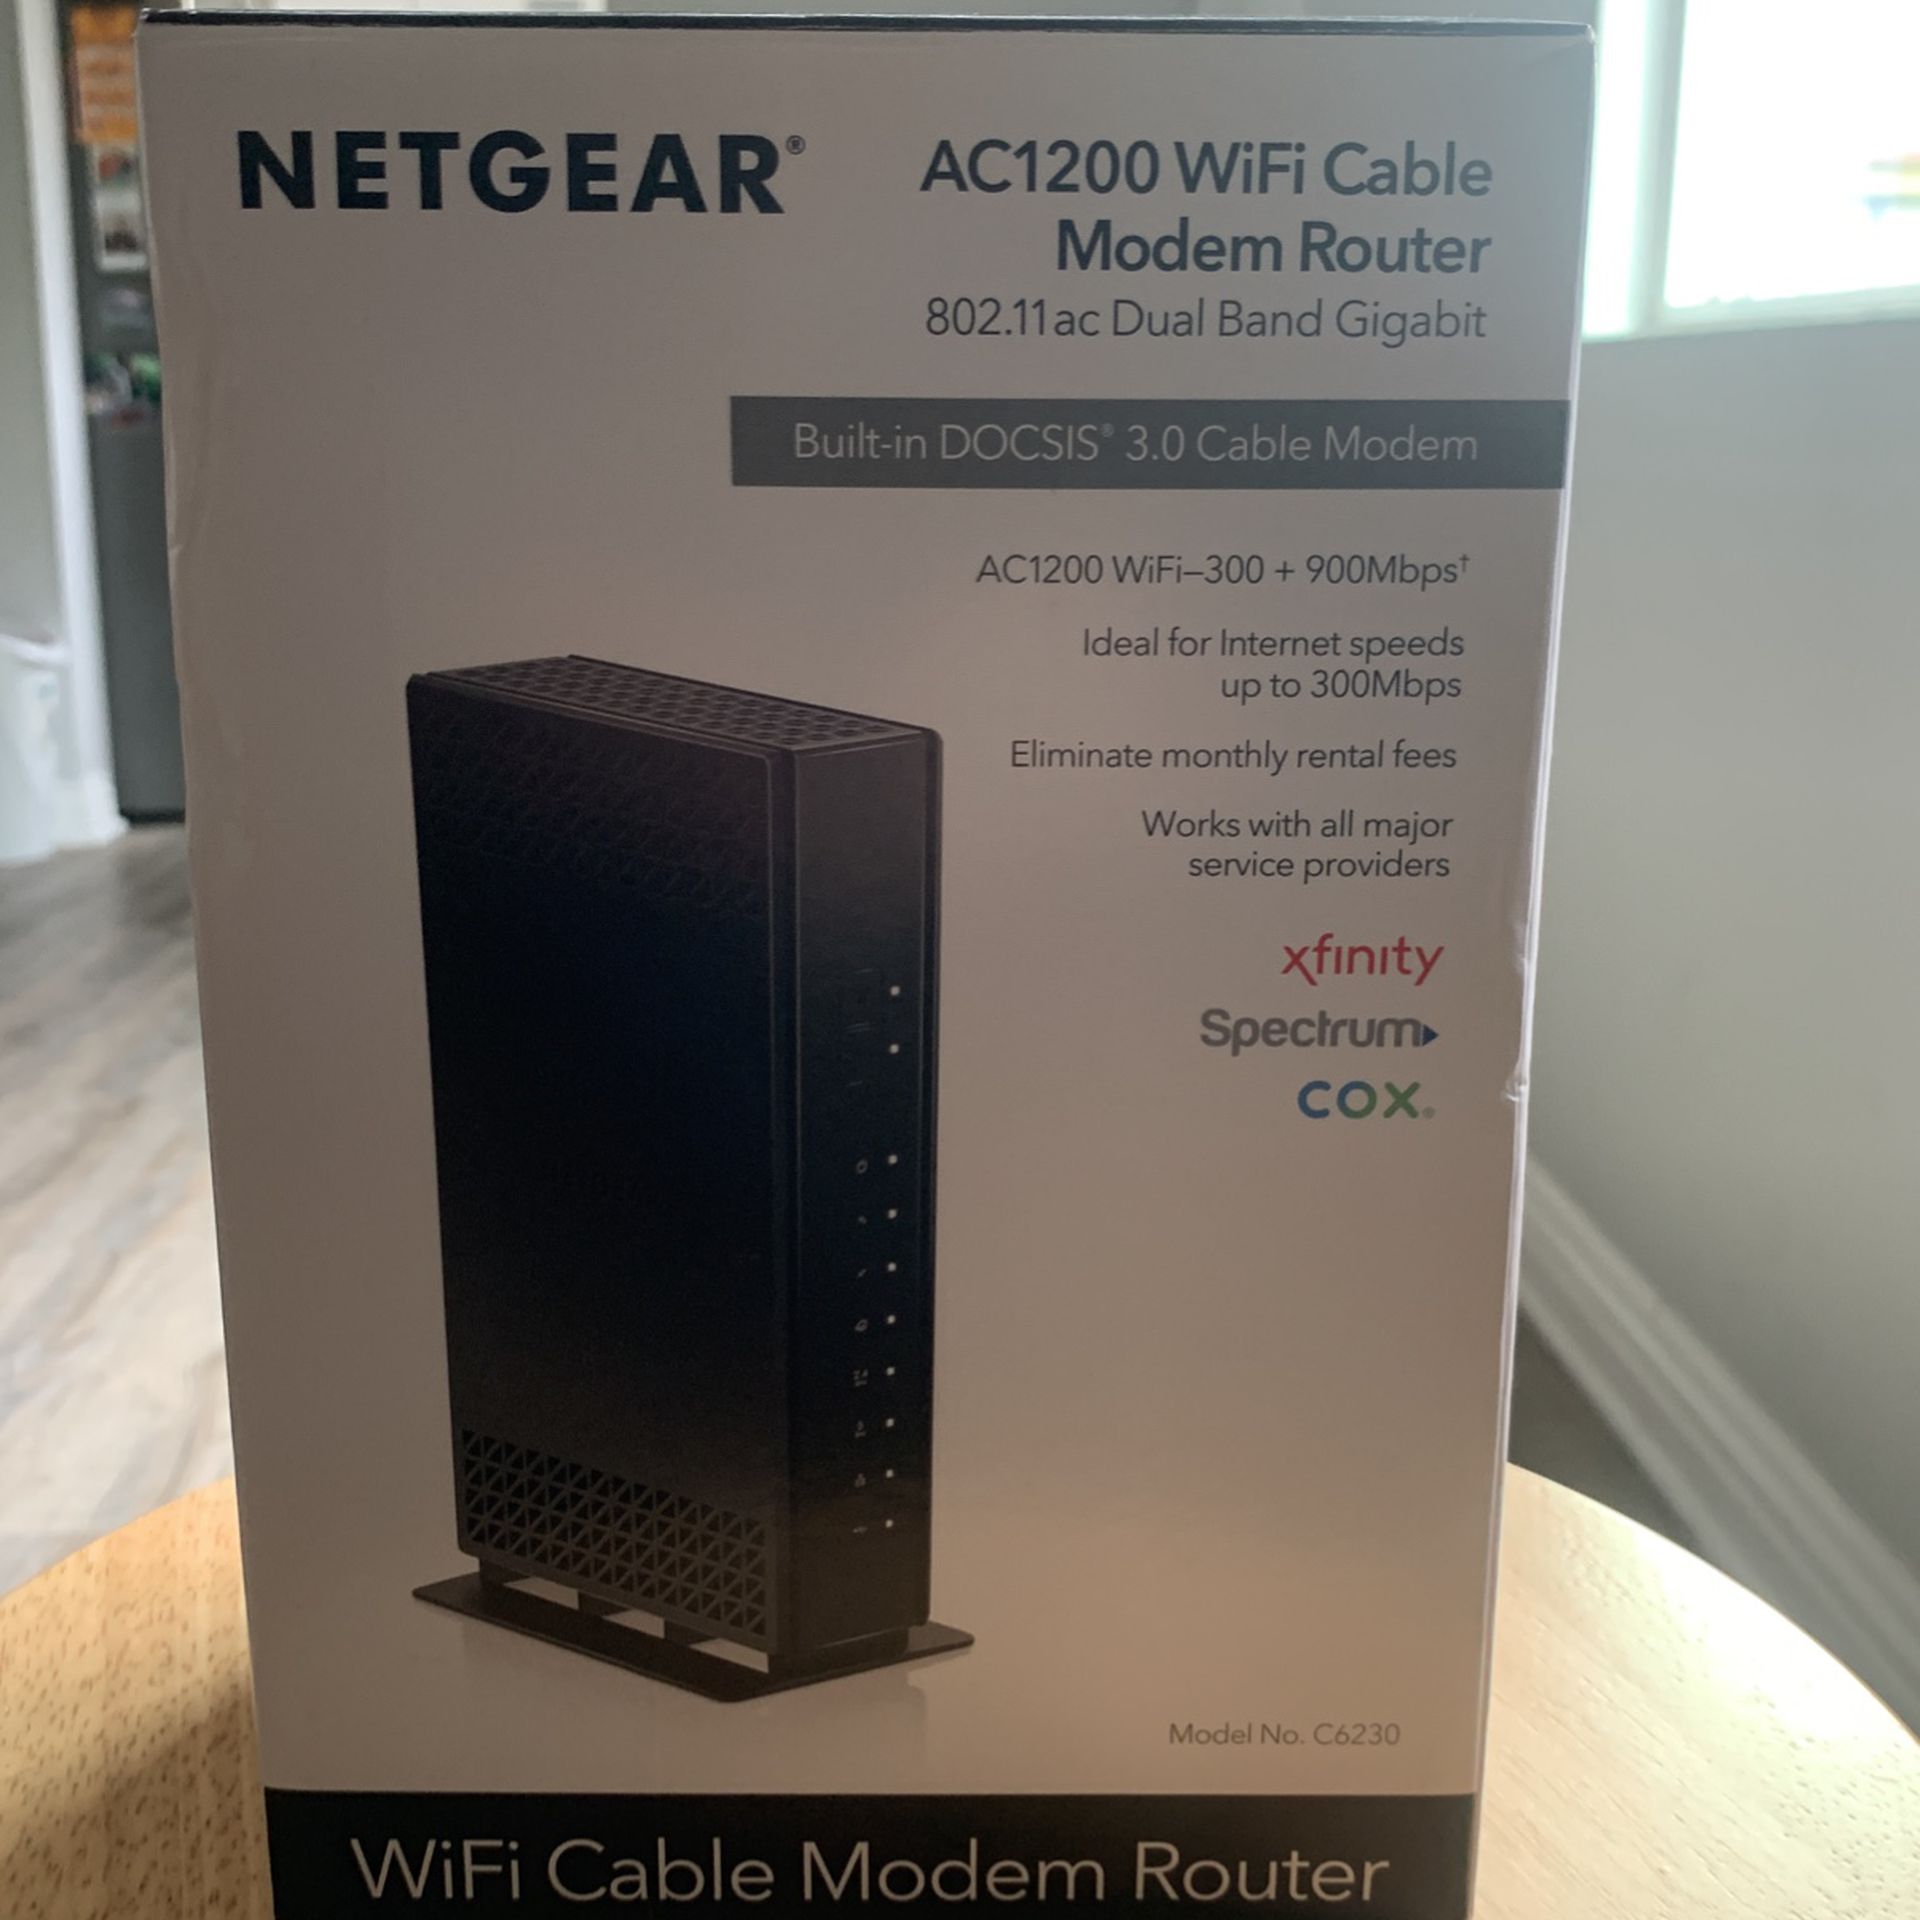 Net gear AC1200 WiFi Cable Modem Router